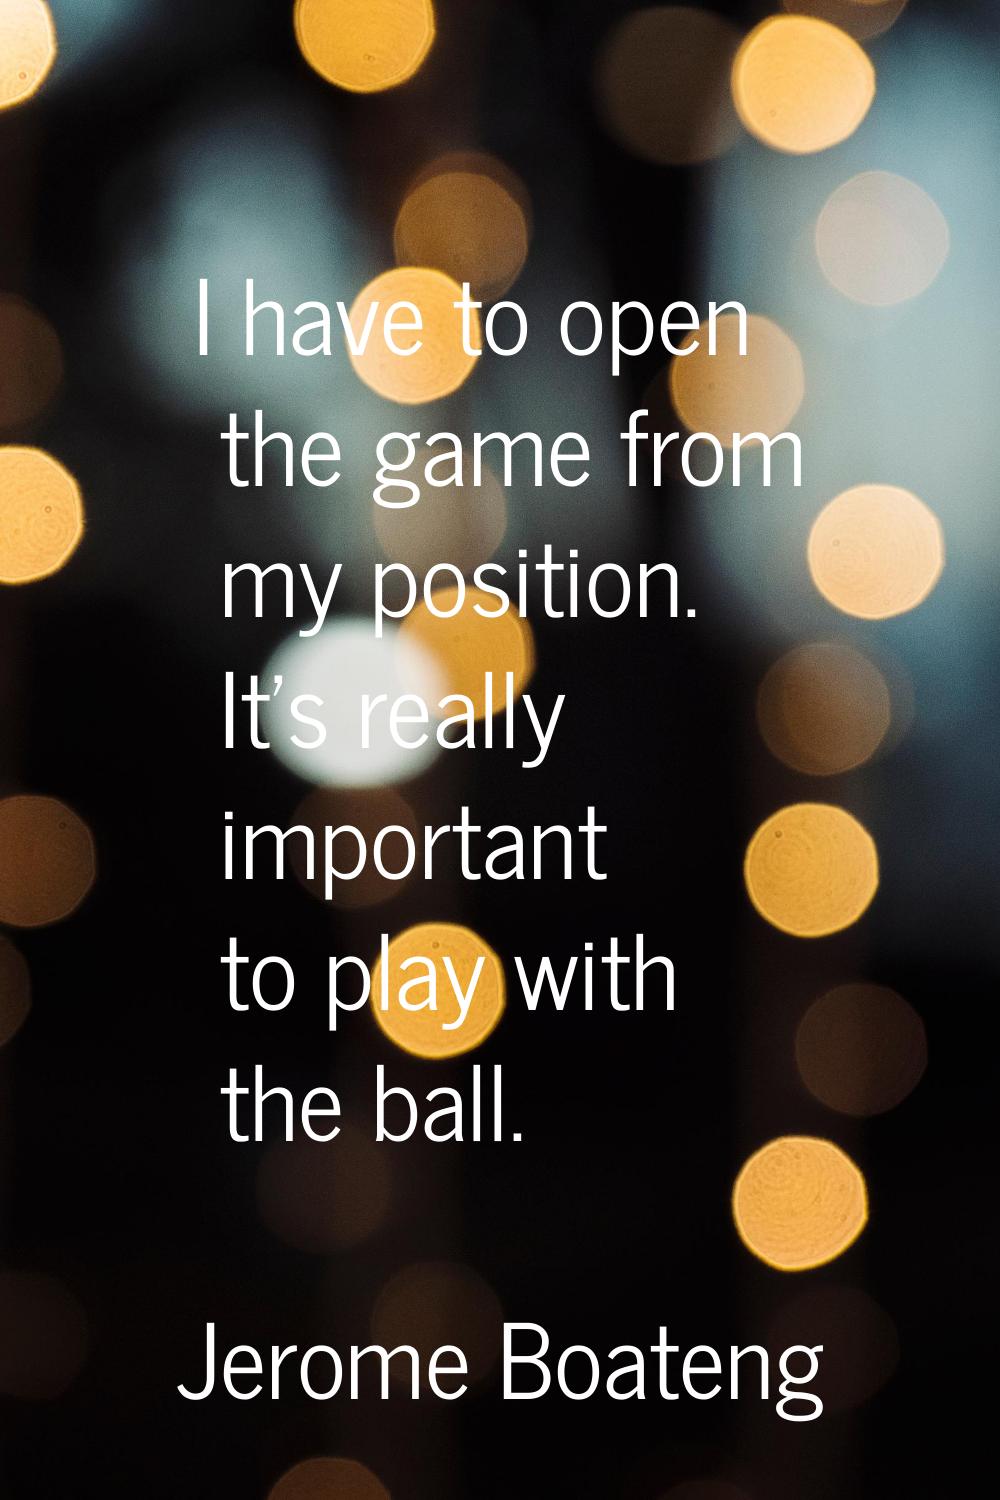 I have to open the game from my position. It's really important to play with the ball.